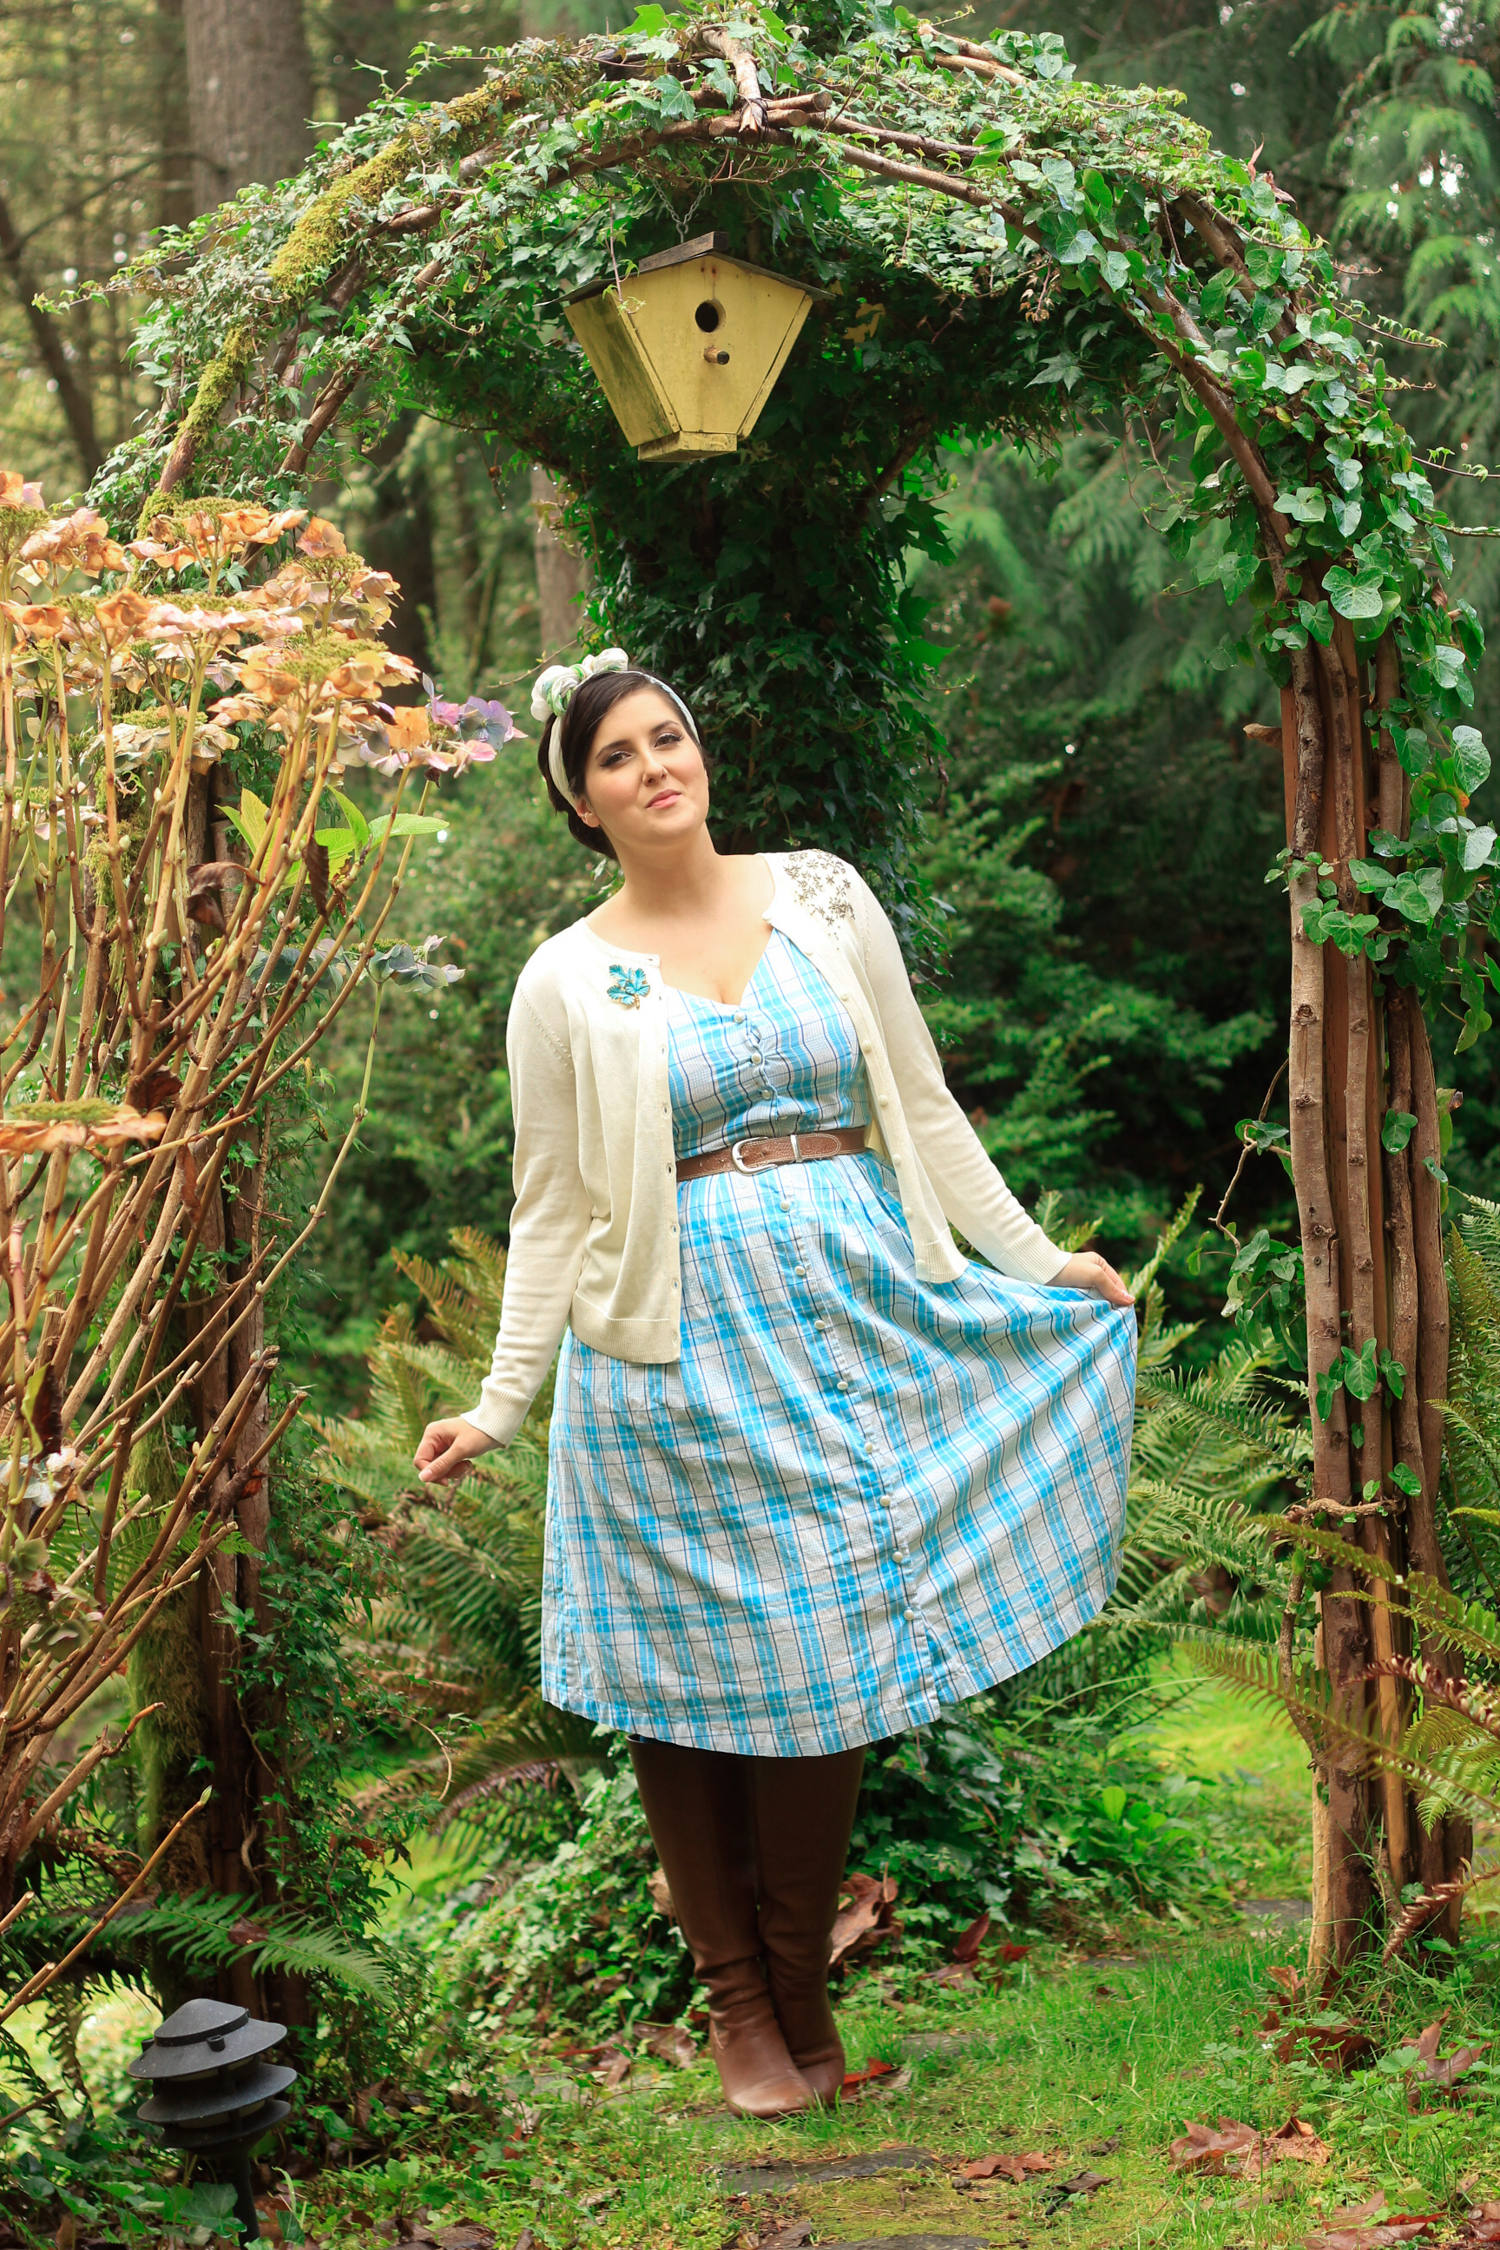 A Vintage Housedress | eyreeffect.com